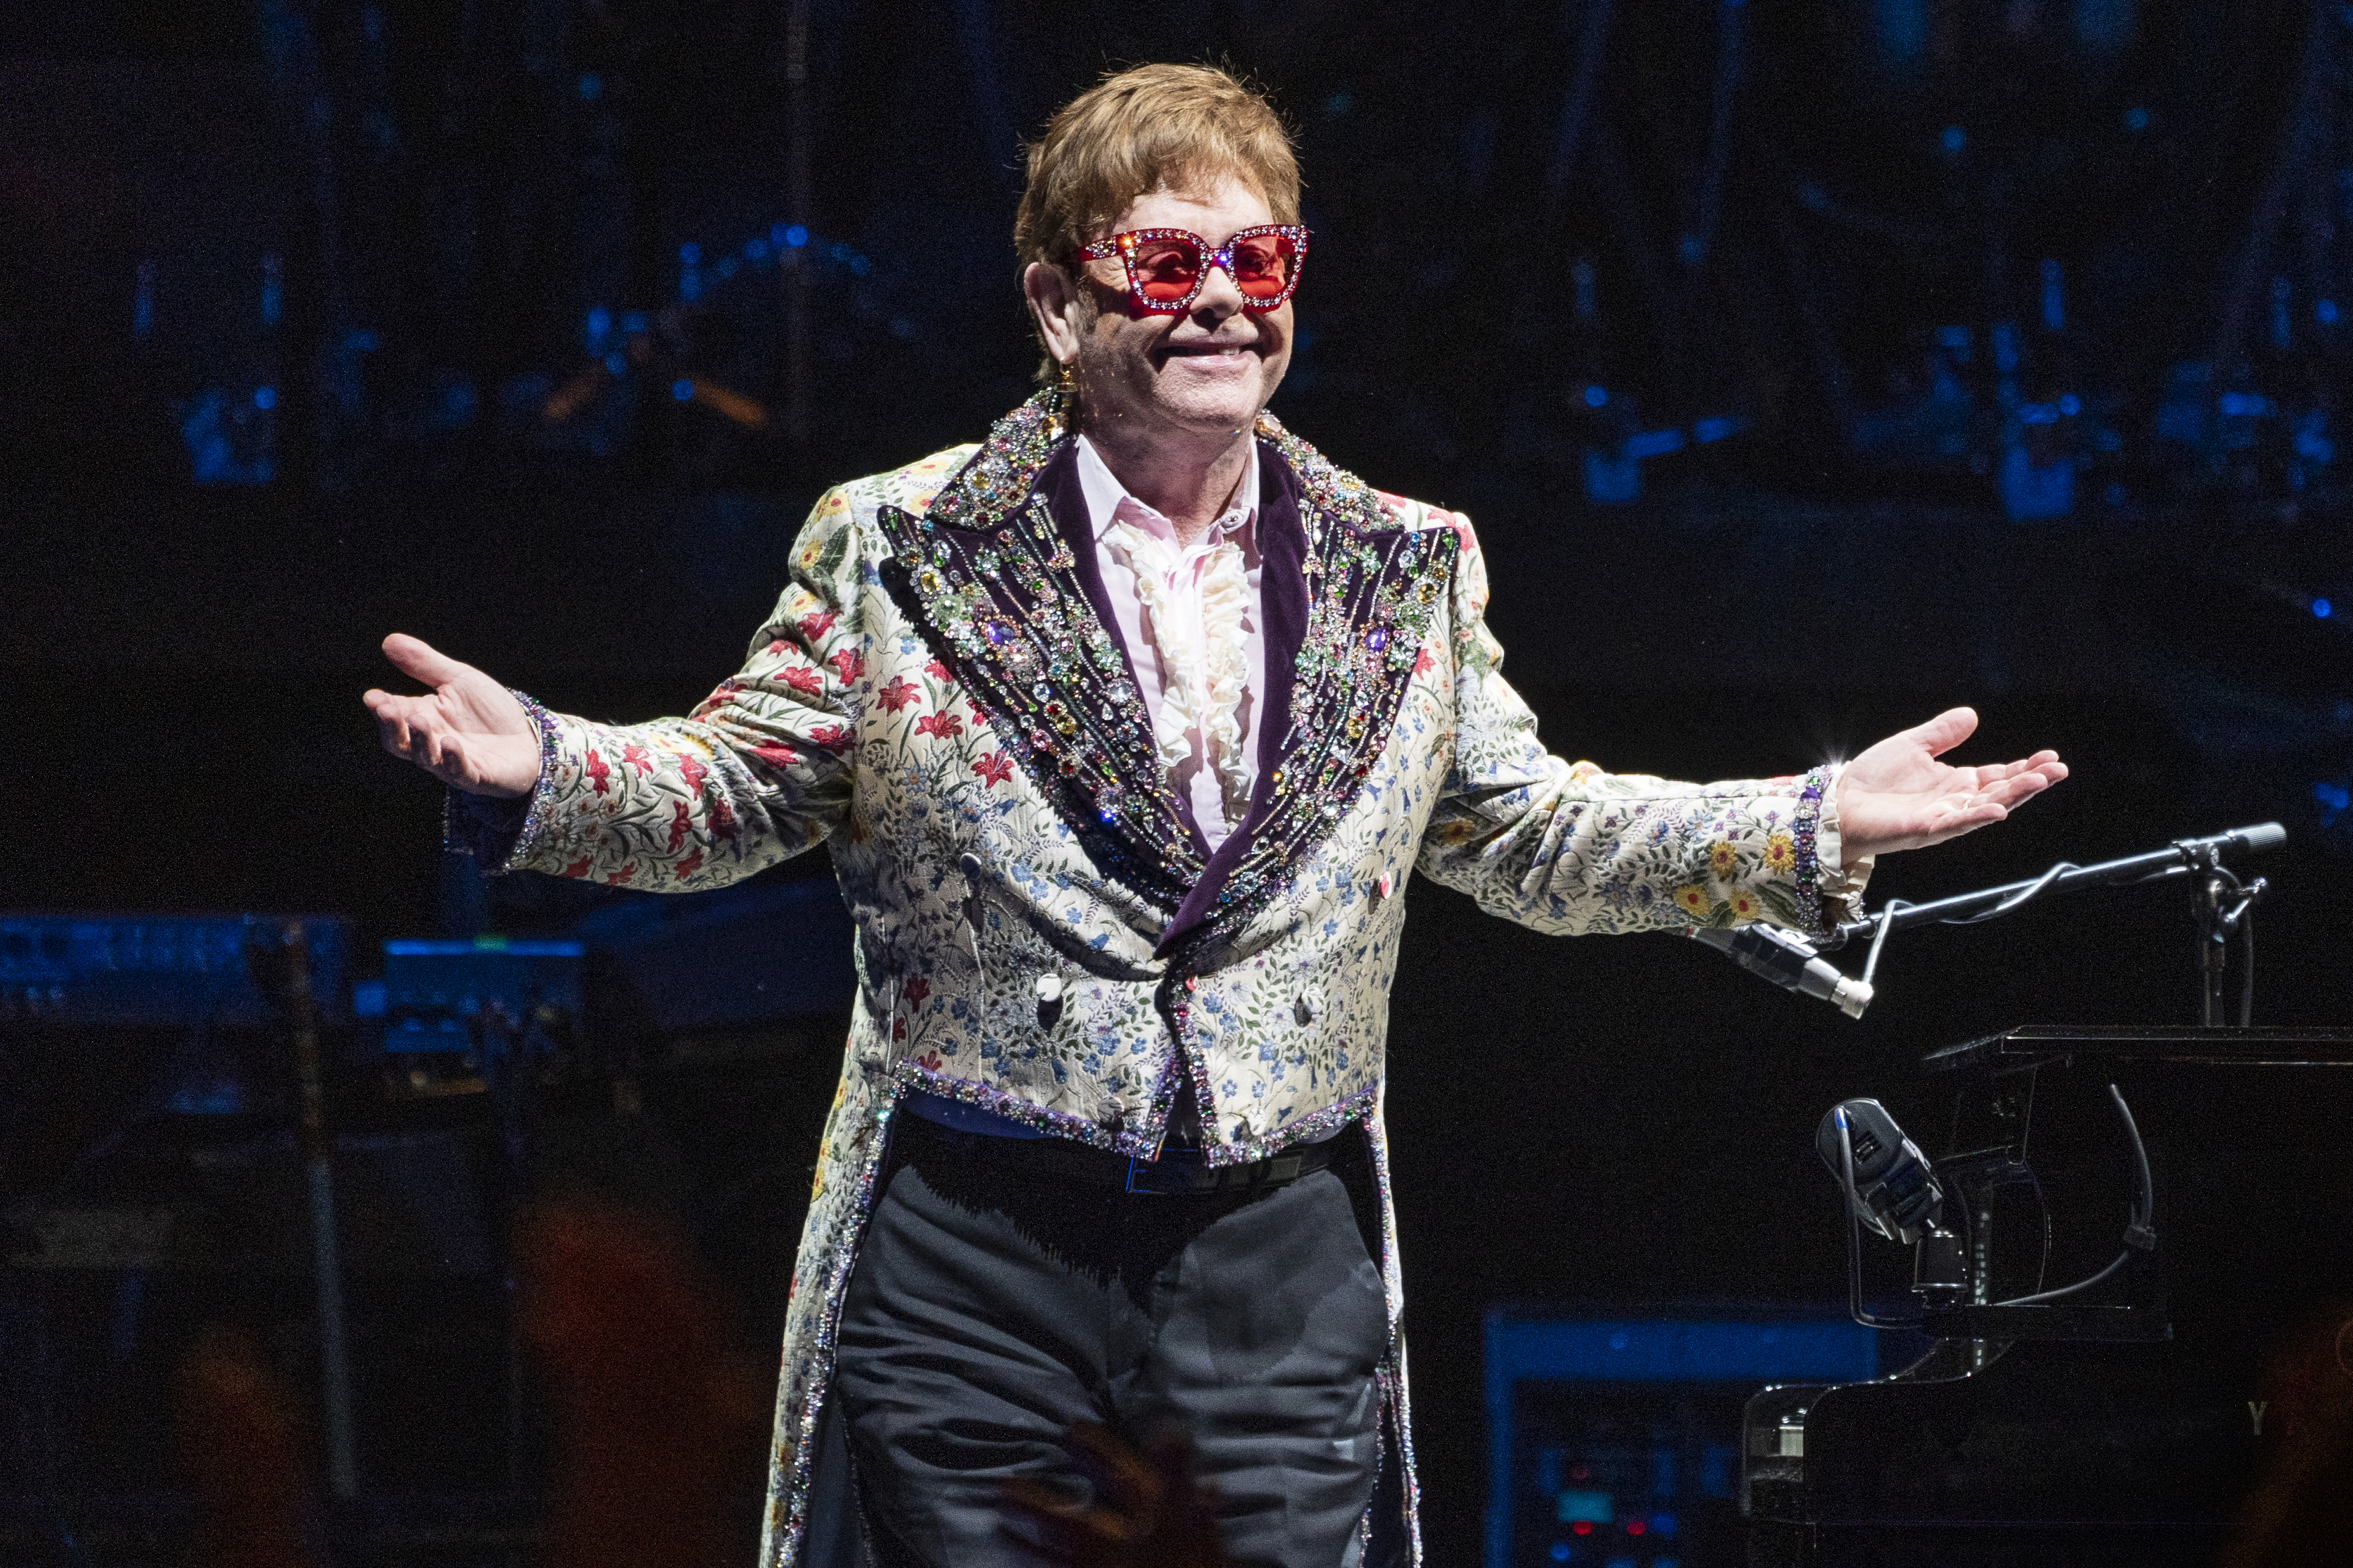 Elton John performs during the Farewell Yellow Brick Road Tour at Smoothie King Center on Jan. 19, 2022 in New Orleans, Louisiana. (Photo by Erika Goldring/Getty Images) (Getty Images-2022 Getty Images)